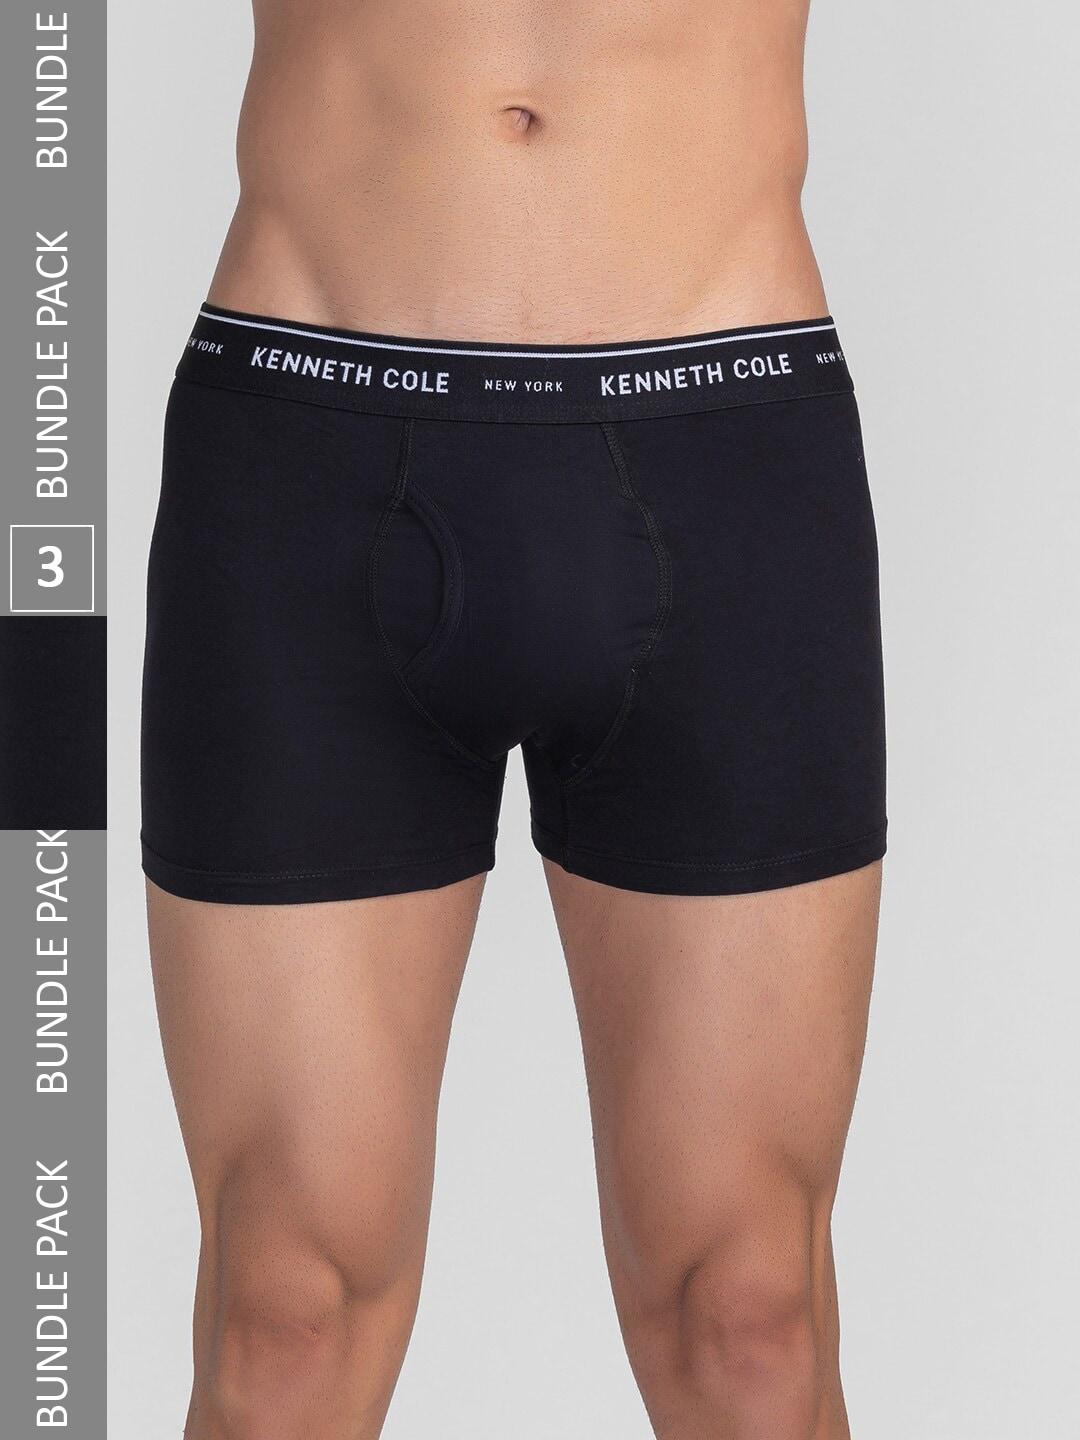 kenneth-cole-men-pack-of-3-brand-logo-printed-waistband-outer-elasticated-trunks